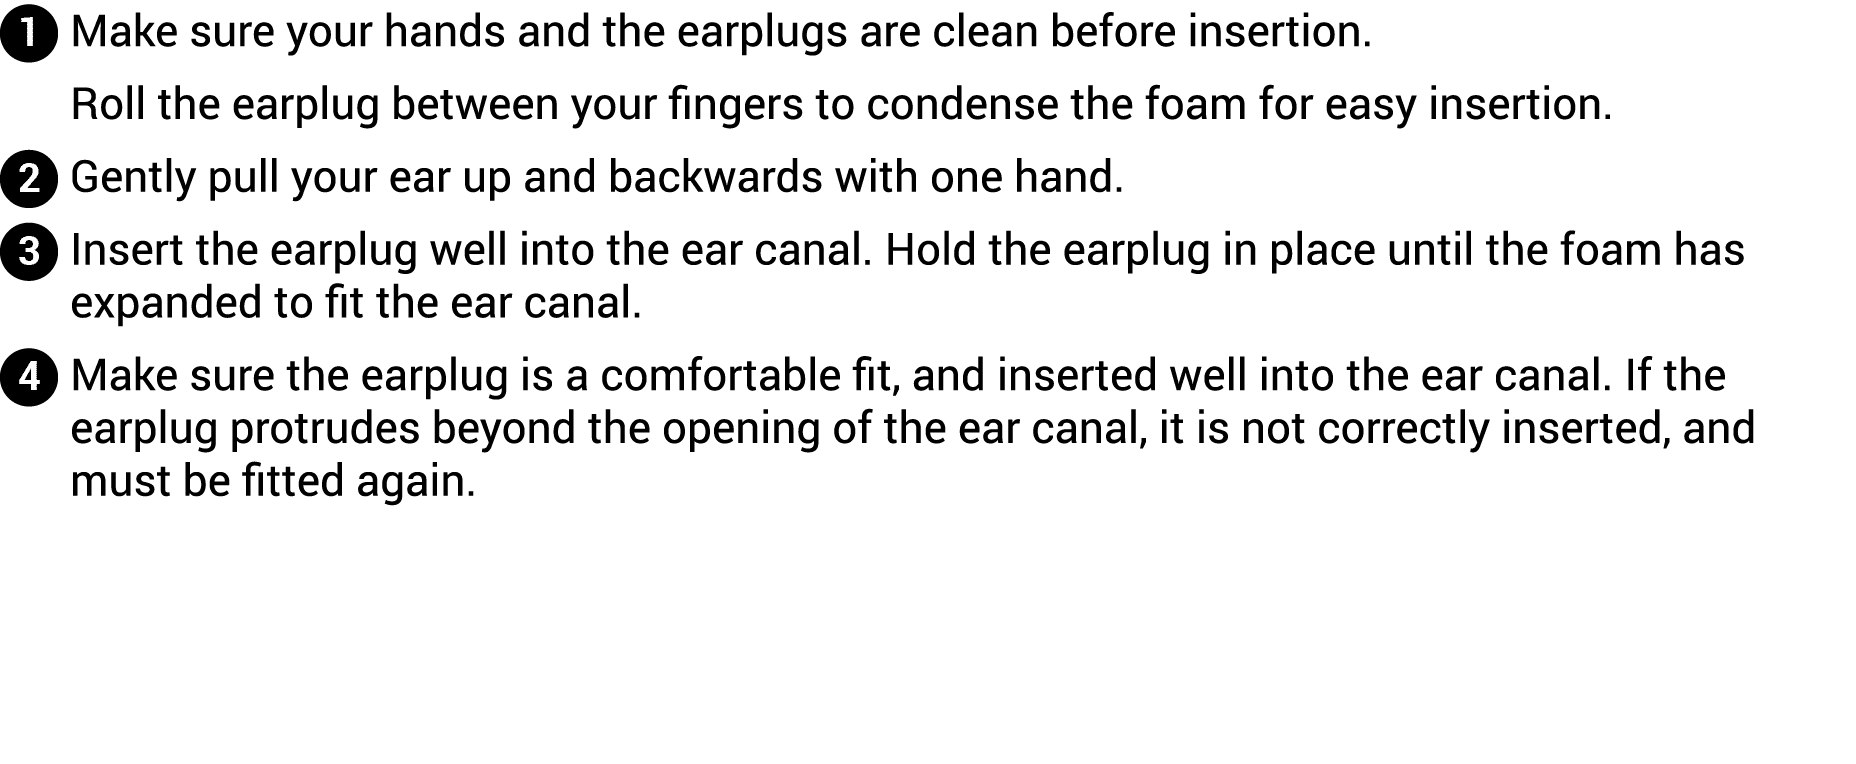  Make sure your hands and the earplugs are clean before insertion  Roll the earplug between your fingers to condense    